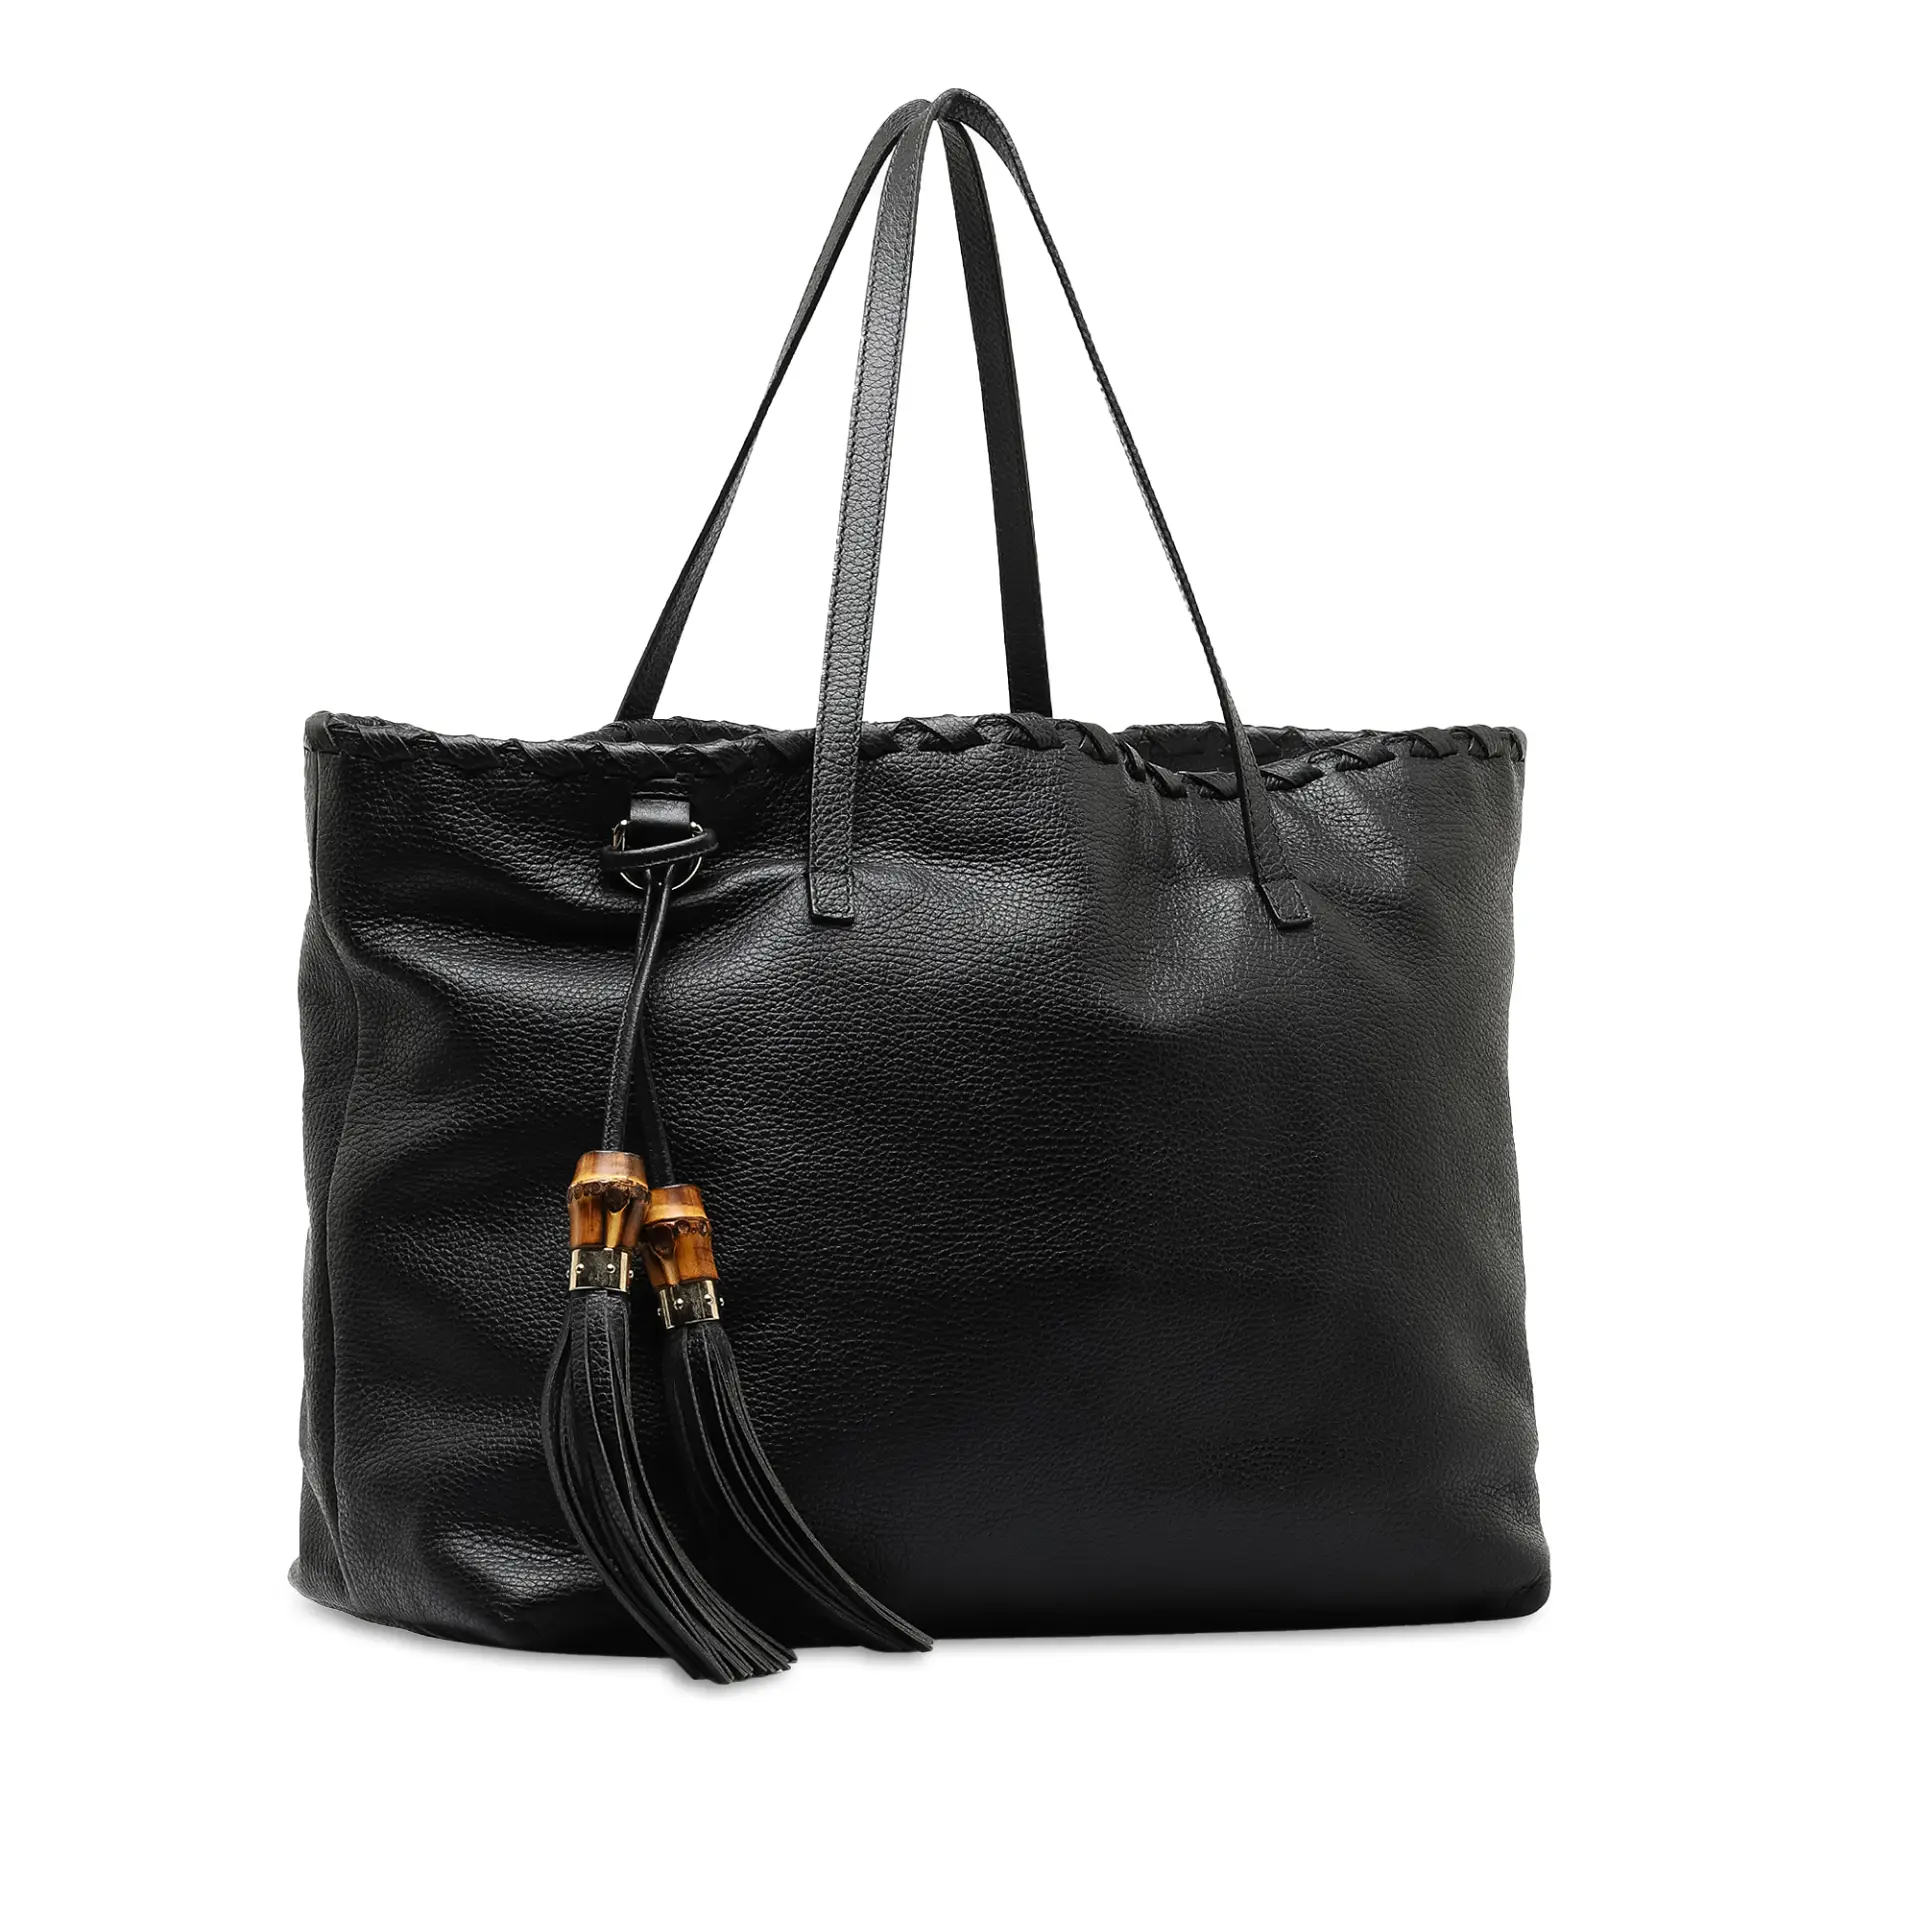 Gucci Leather Bamboo Tassel Tote